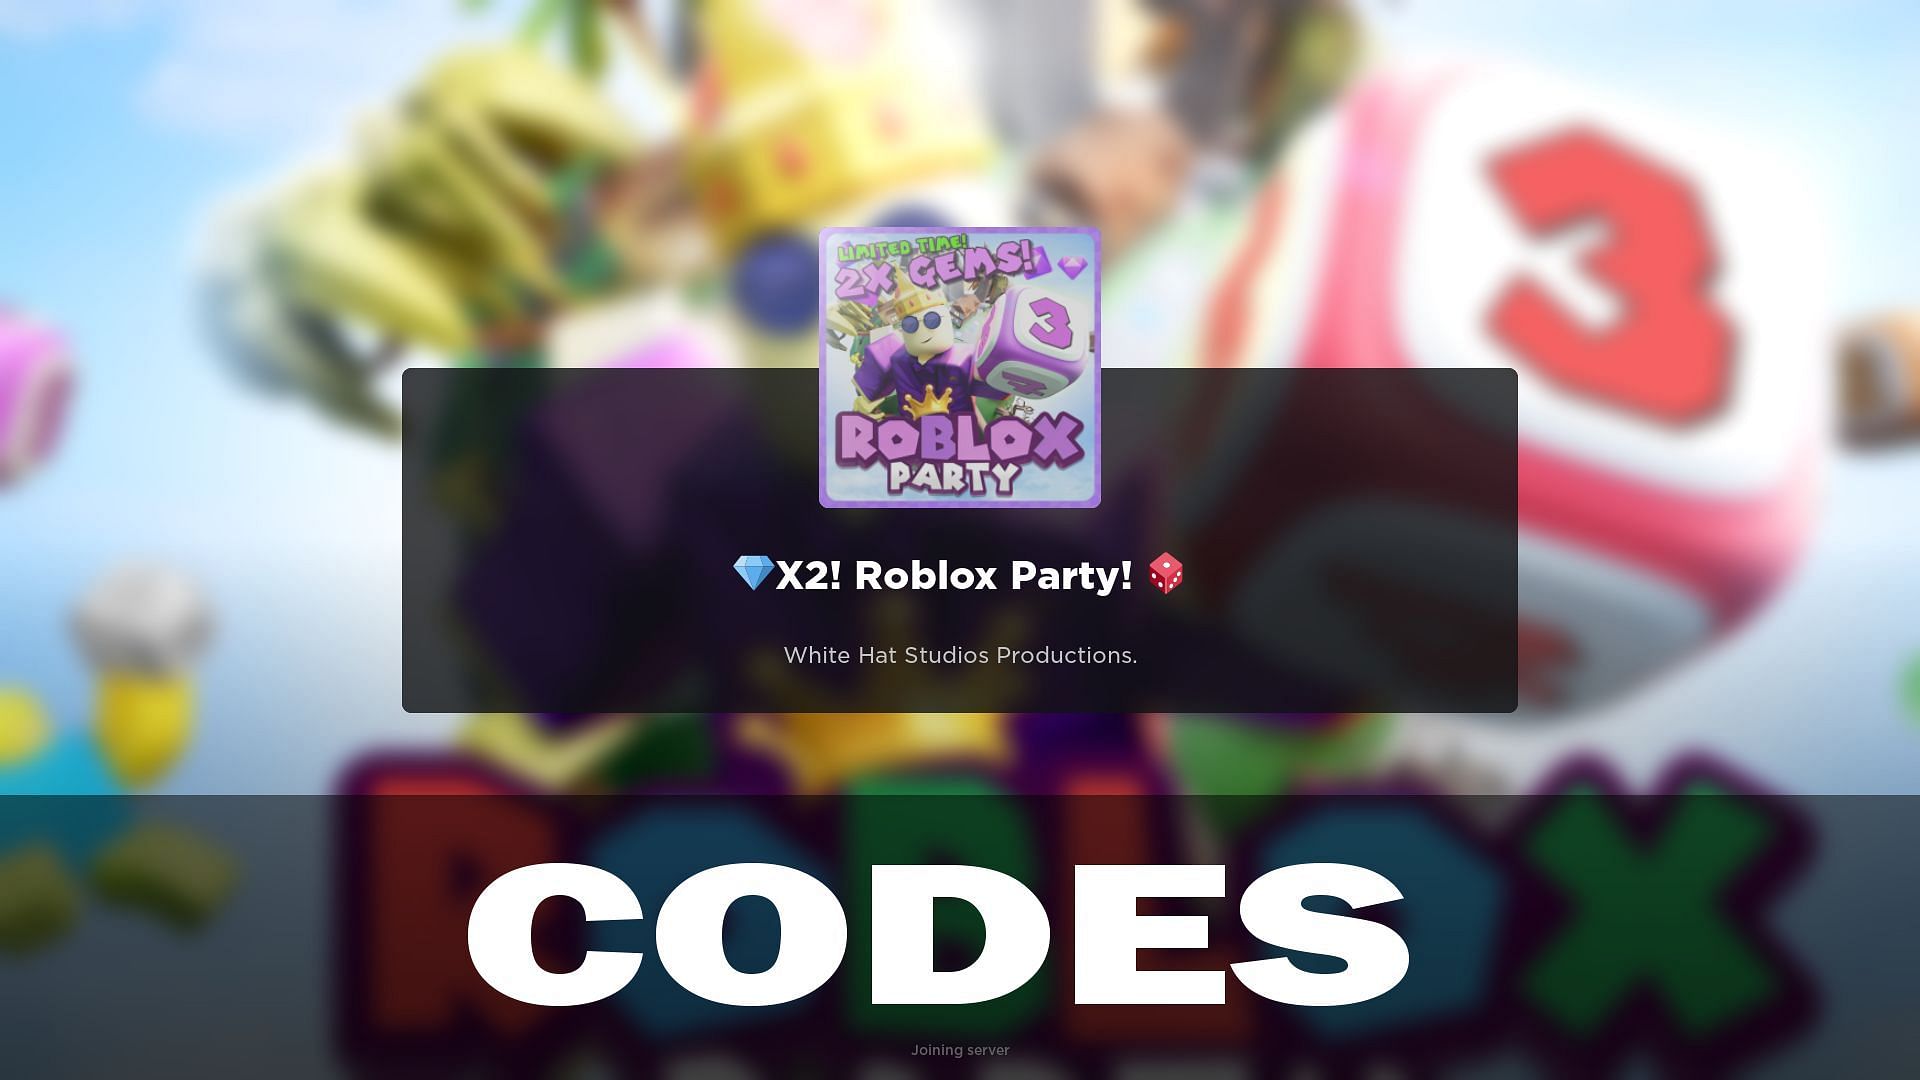 Roblox Party codes